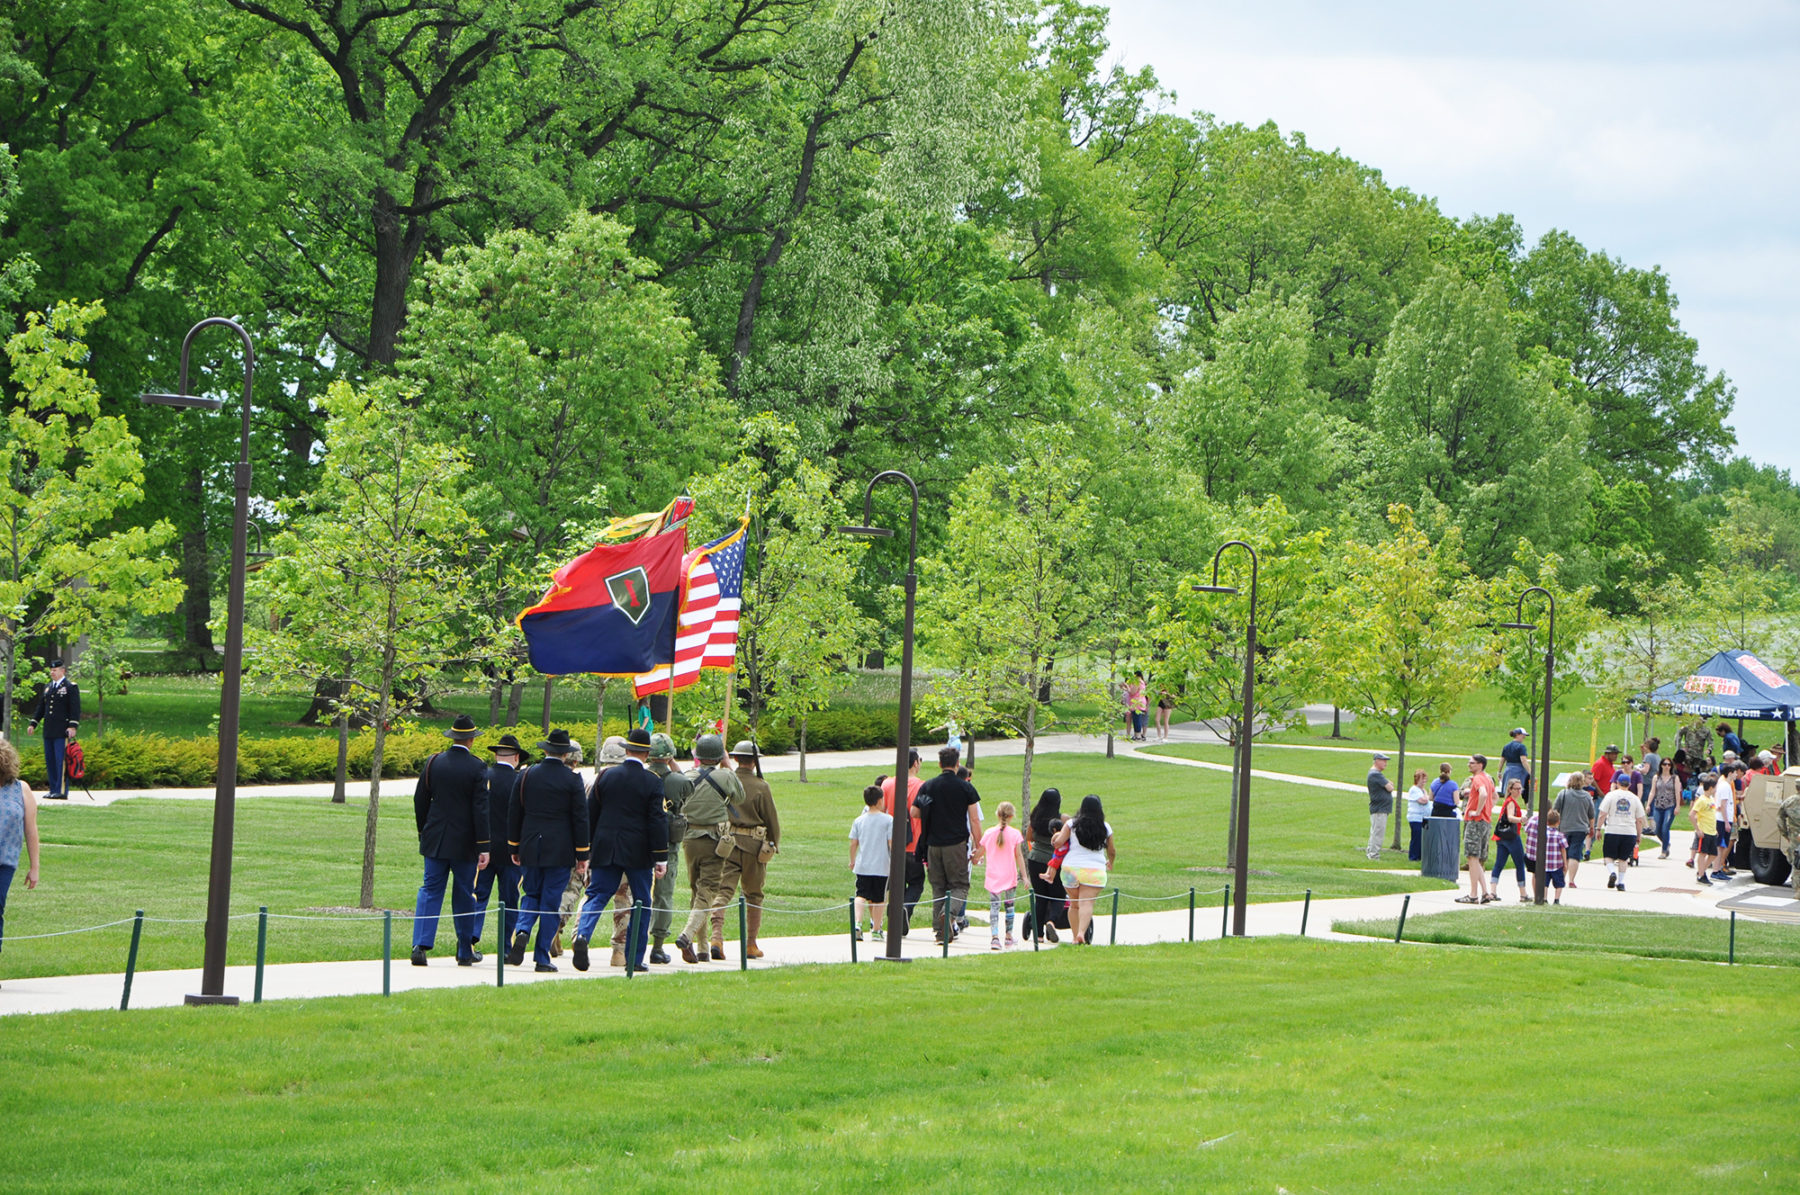 people carry flags down a paved pathway surrounded by green grass fields